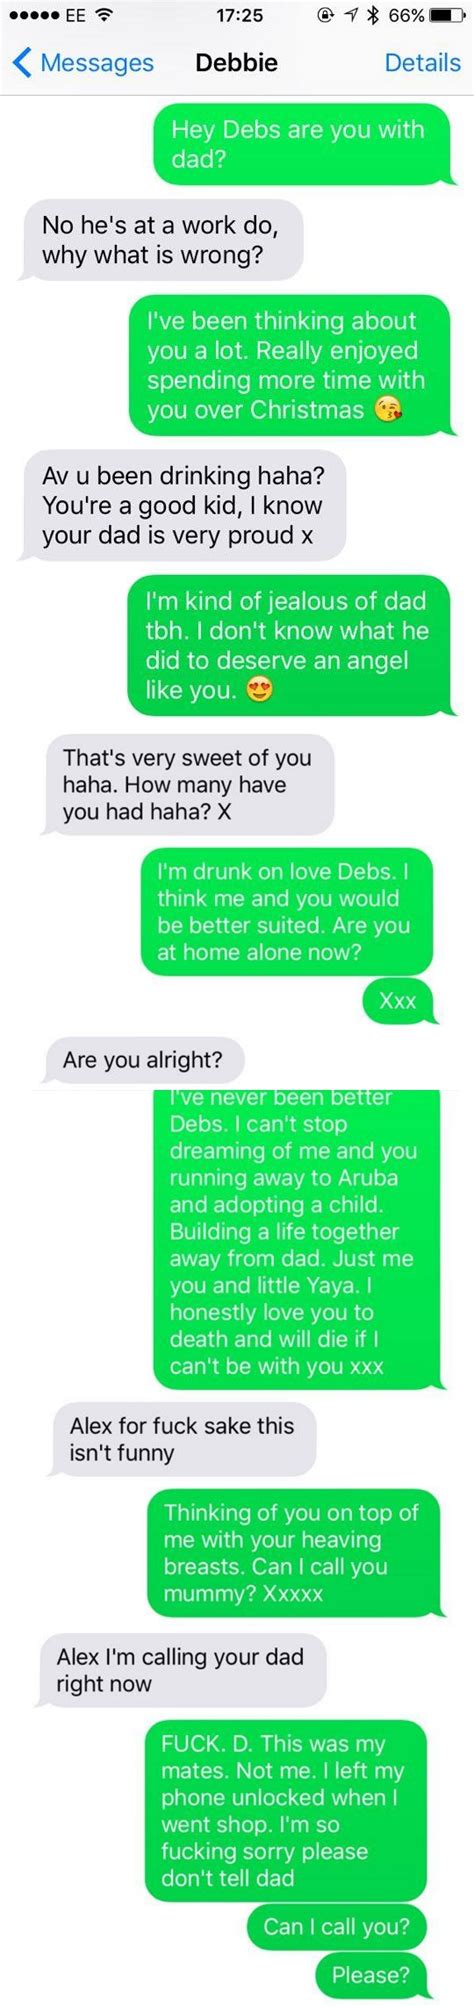 This Guys Friends Took Texting His Stepmom As A Prank Way Too Far